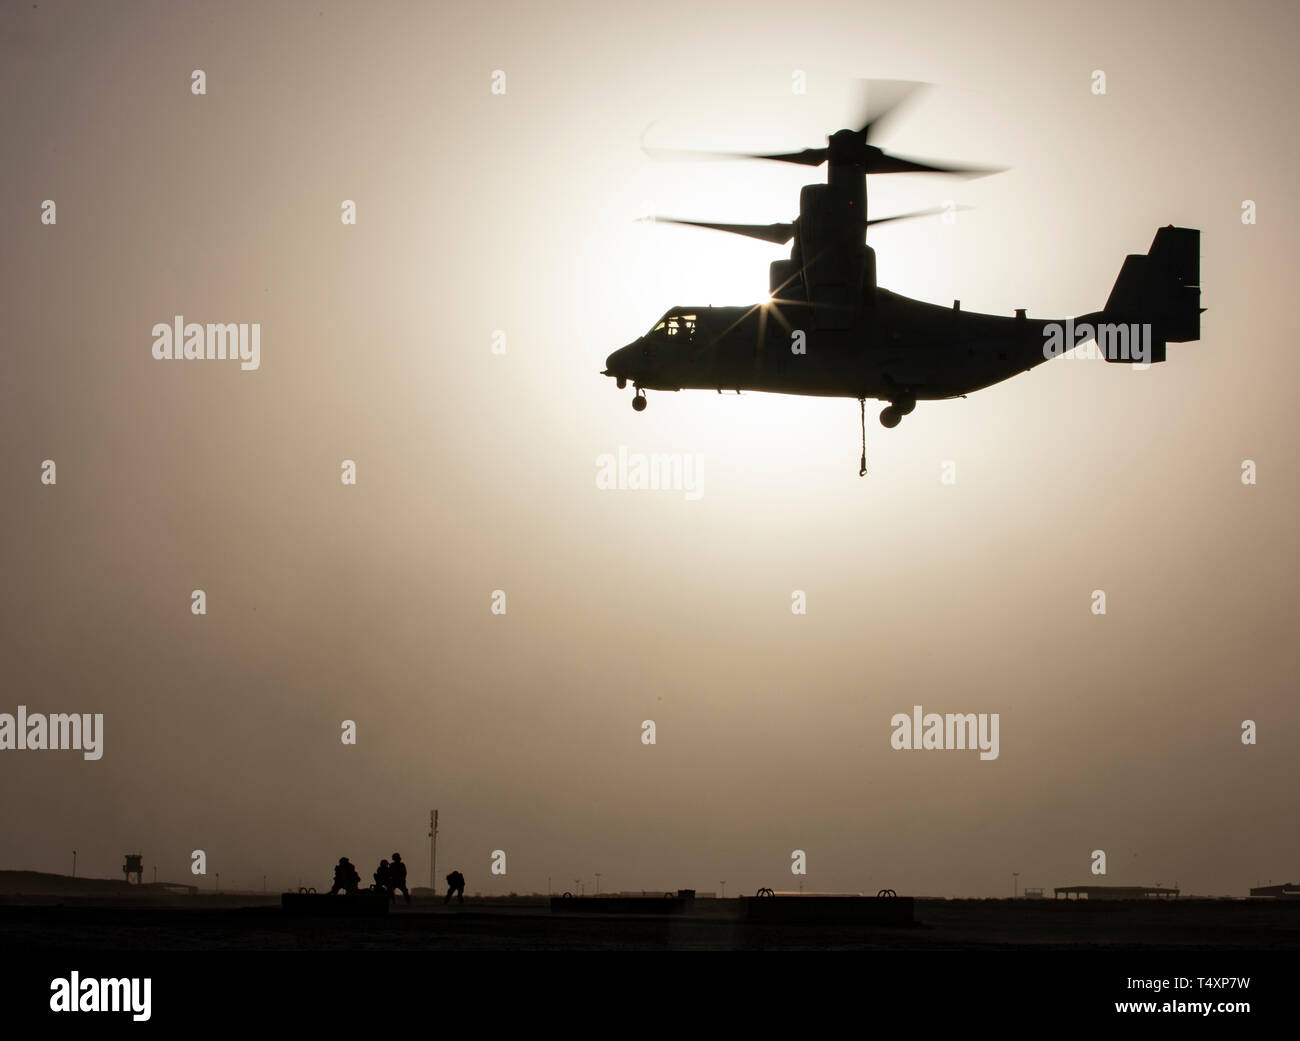 CAMP BEUHRING, Kuwait (April 11, 2019) A U.S. Marine MV-22 Osprey makes its approach while landing support specialists with the 22nd Marine Expeditionary Unit prepare to attach a 1,500 pound beam as part of helicopter support team training during Marine Expeditionary Unit Exercise. The Marines, with Marine Medium Tiltrotor Squadron 264 (Reinforced) and Combat Logistics Battalion 22, participated the training to build and sharpen their skills in order to maintain combat readiness. Marines and Sailors with the 22nd MEU and Kearsarge Amphibious Ready Group are currently deployed to the U.S. 5th F Stock Photo